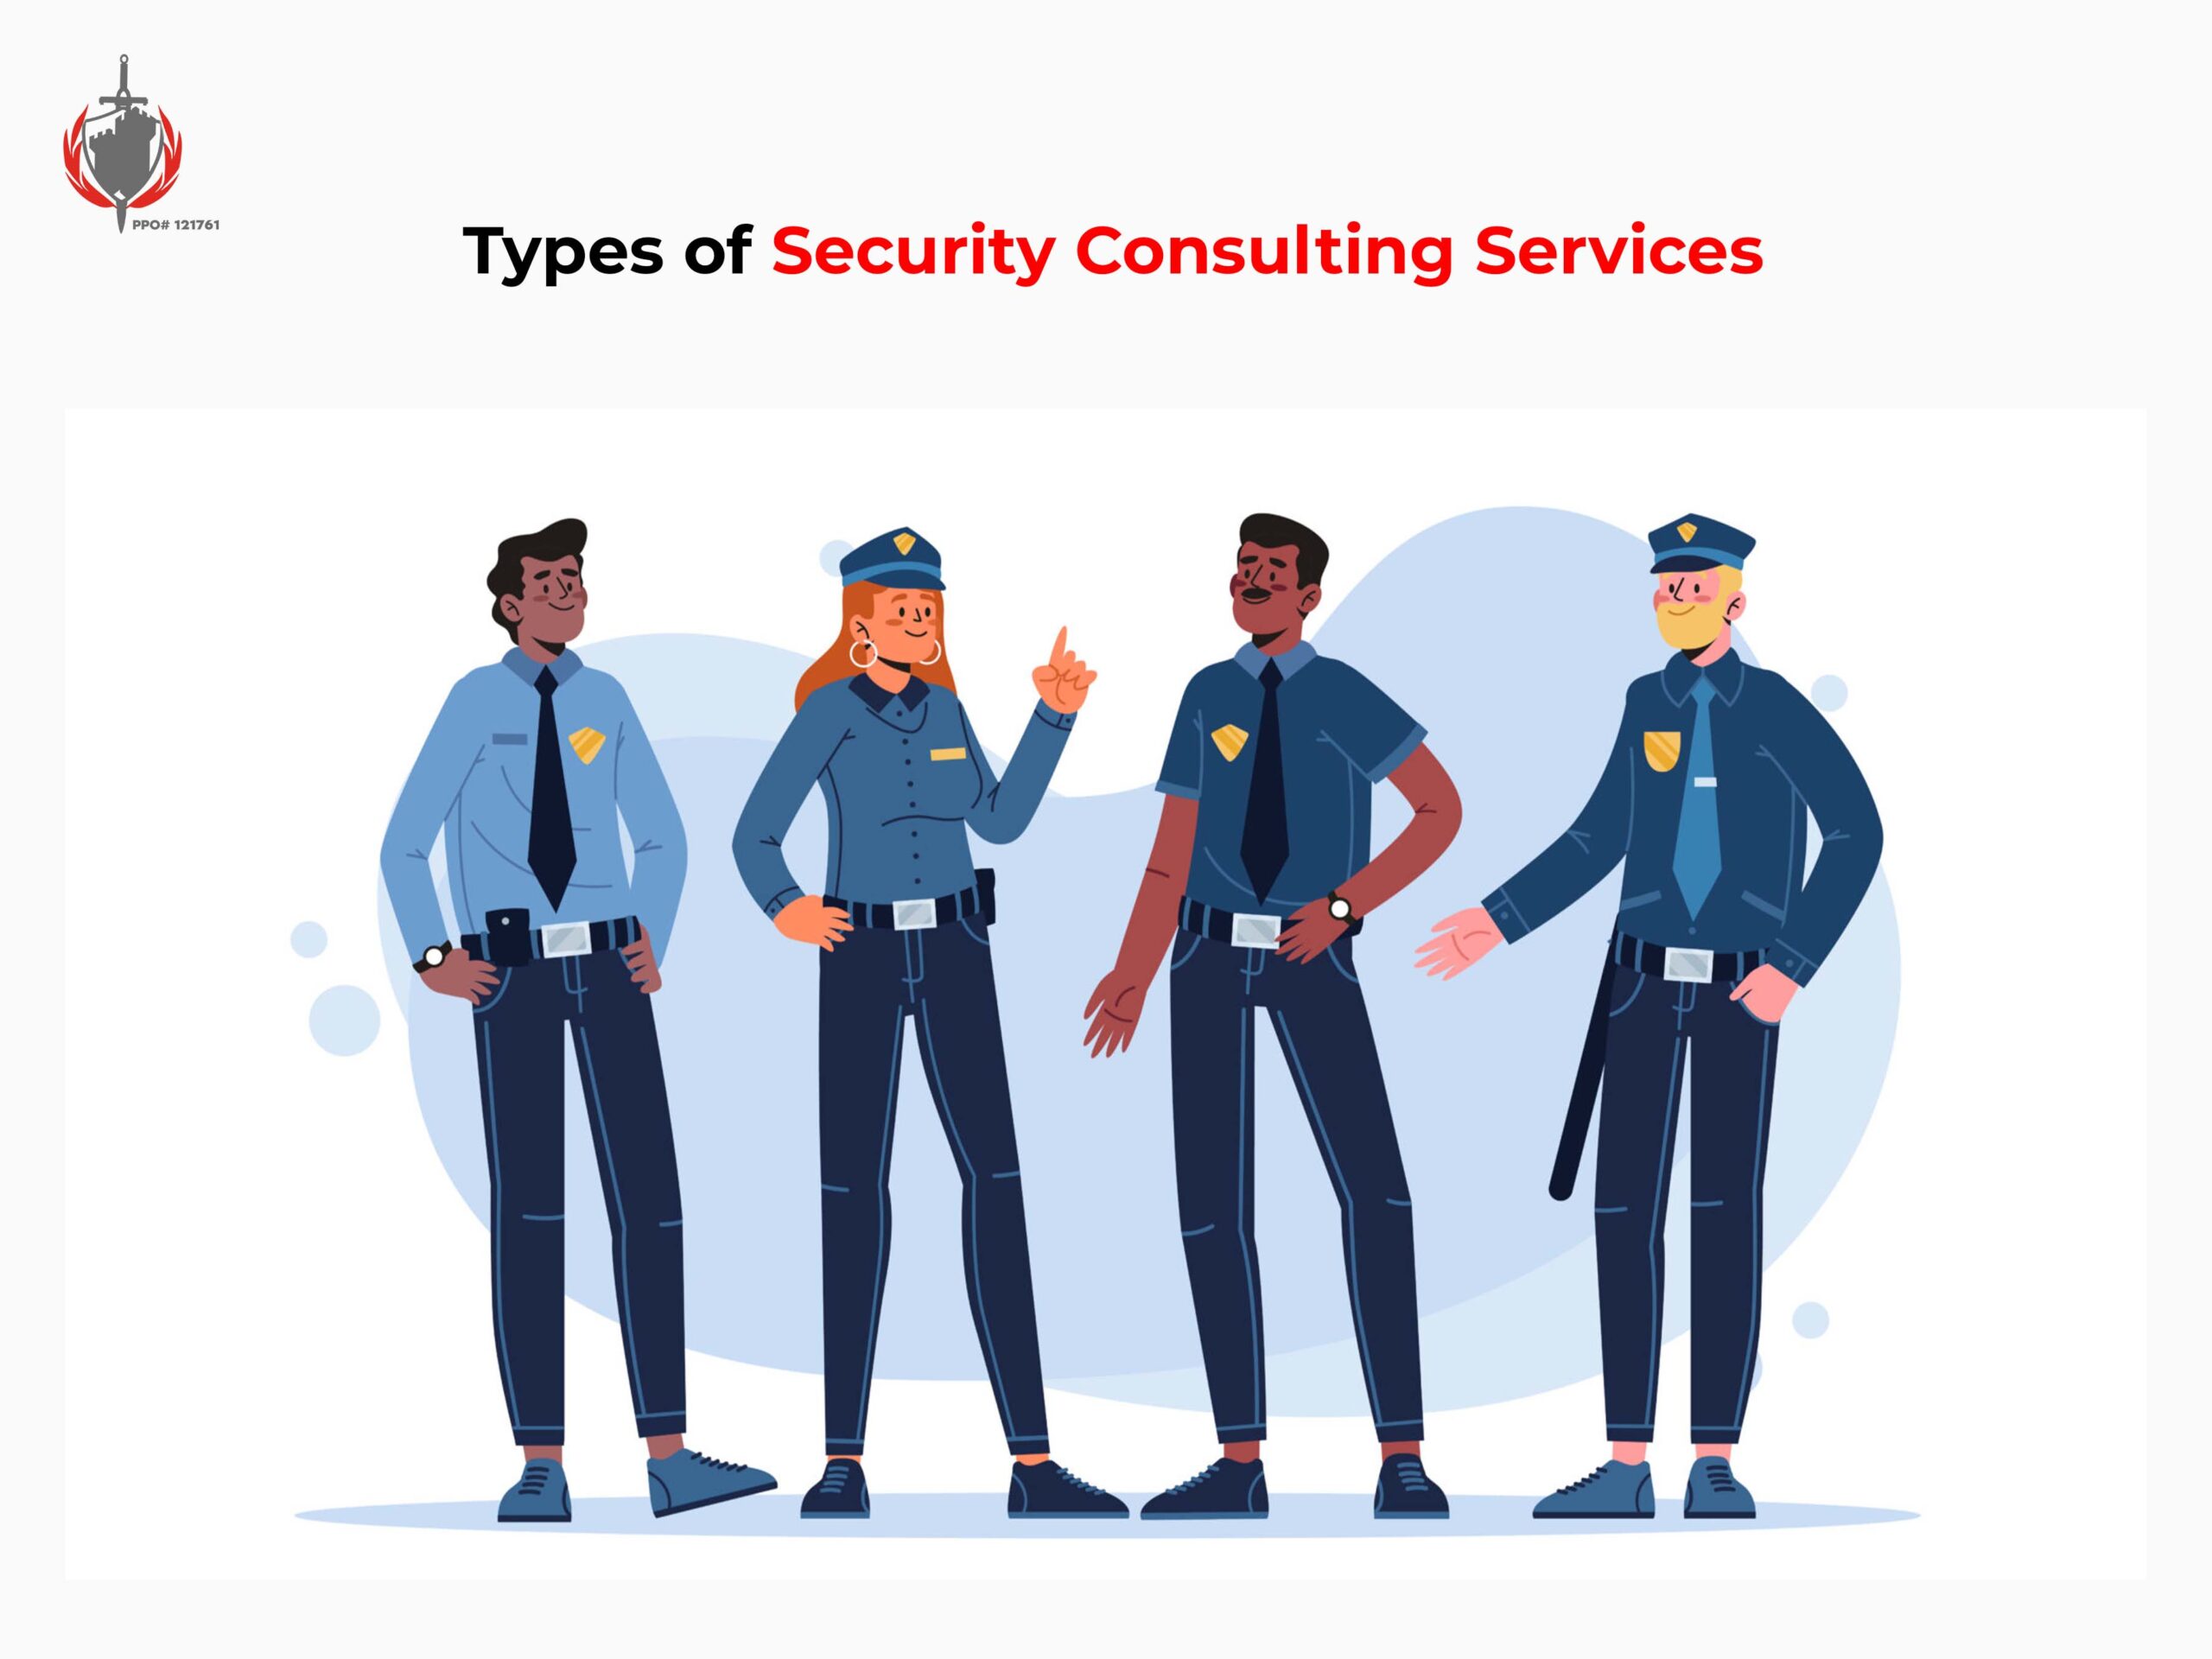 Types of Security Consulting Services